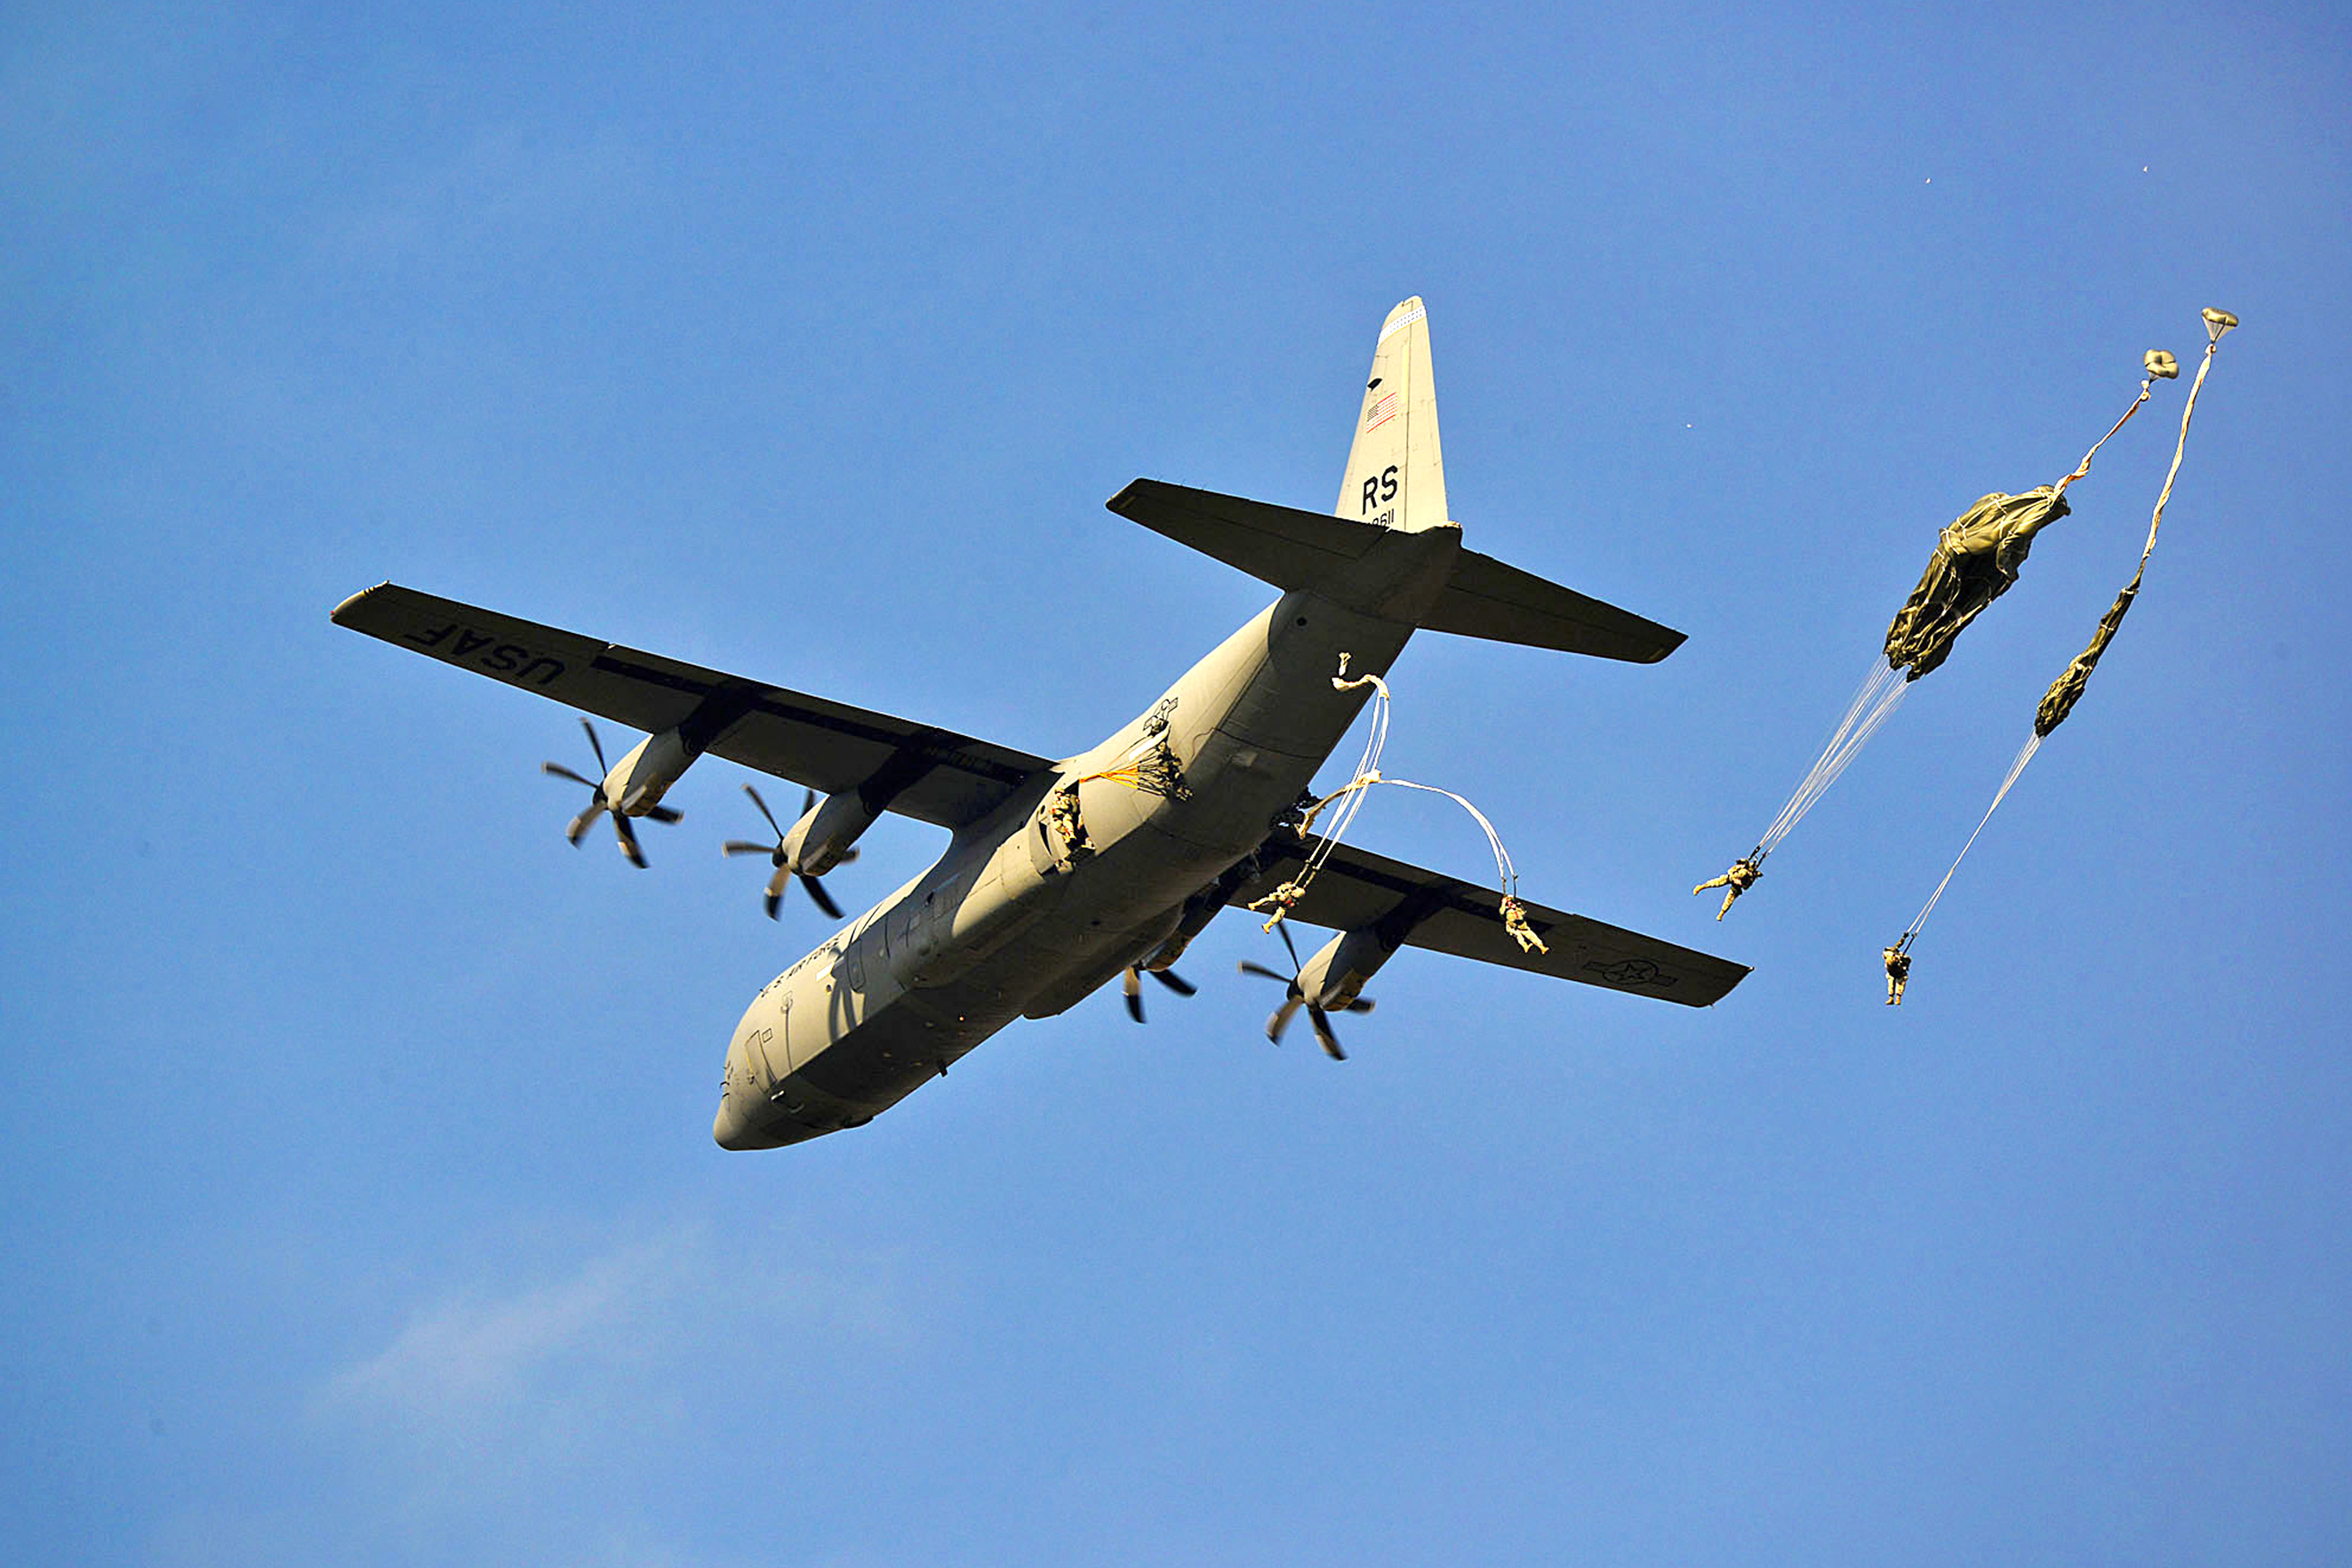 U.S. paratroopers jump from a C-130 Hercules aircraft over Juliet drop zone  in Pordenone, Italy